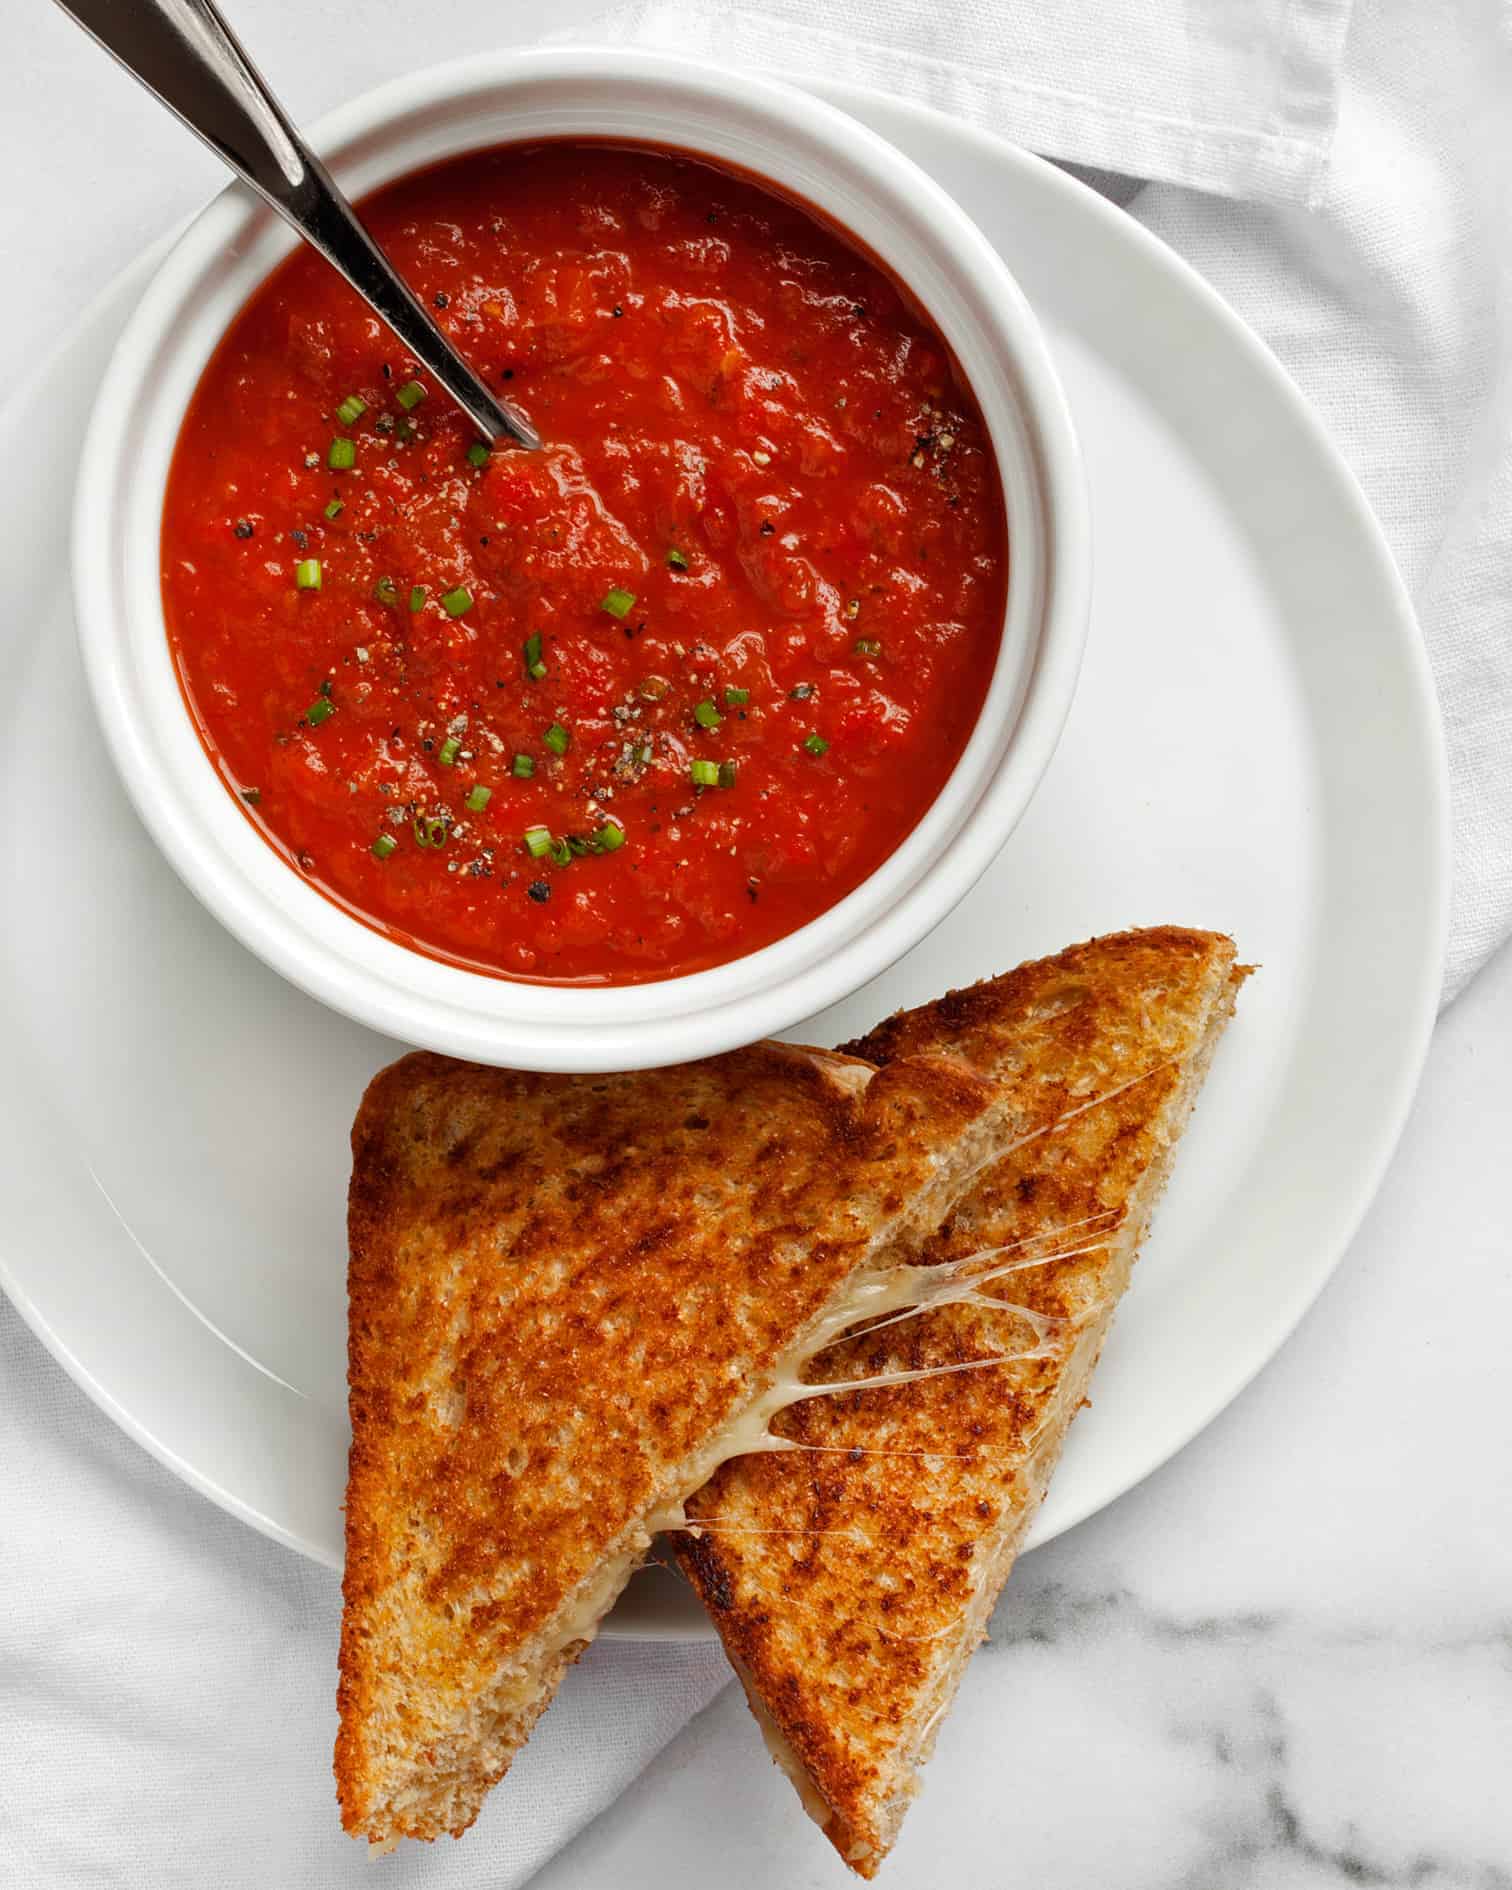 Chipotle Roasted Red Pepper Tomato Soup with Grilled Cheese Sandwich